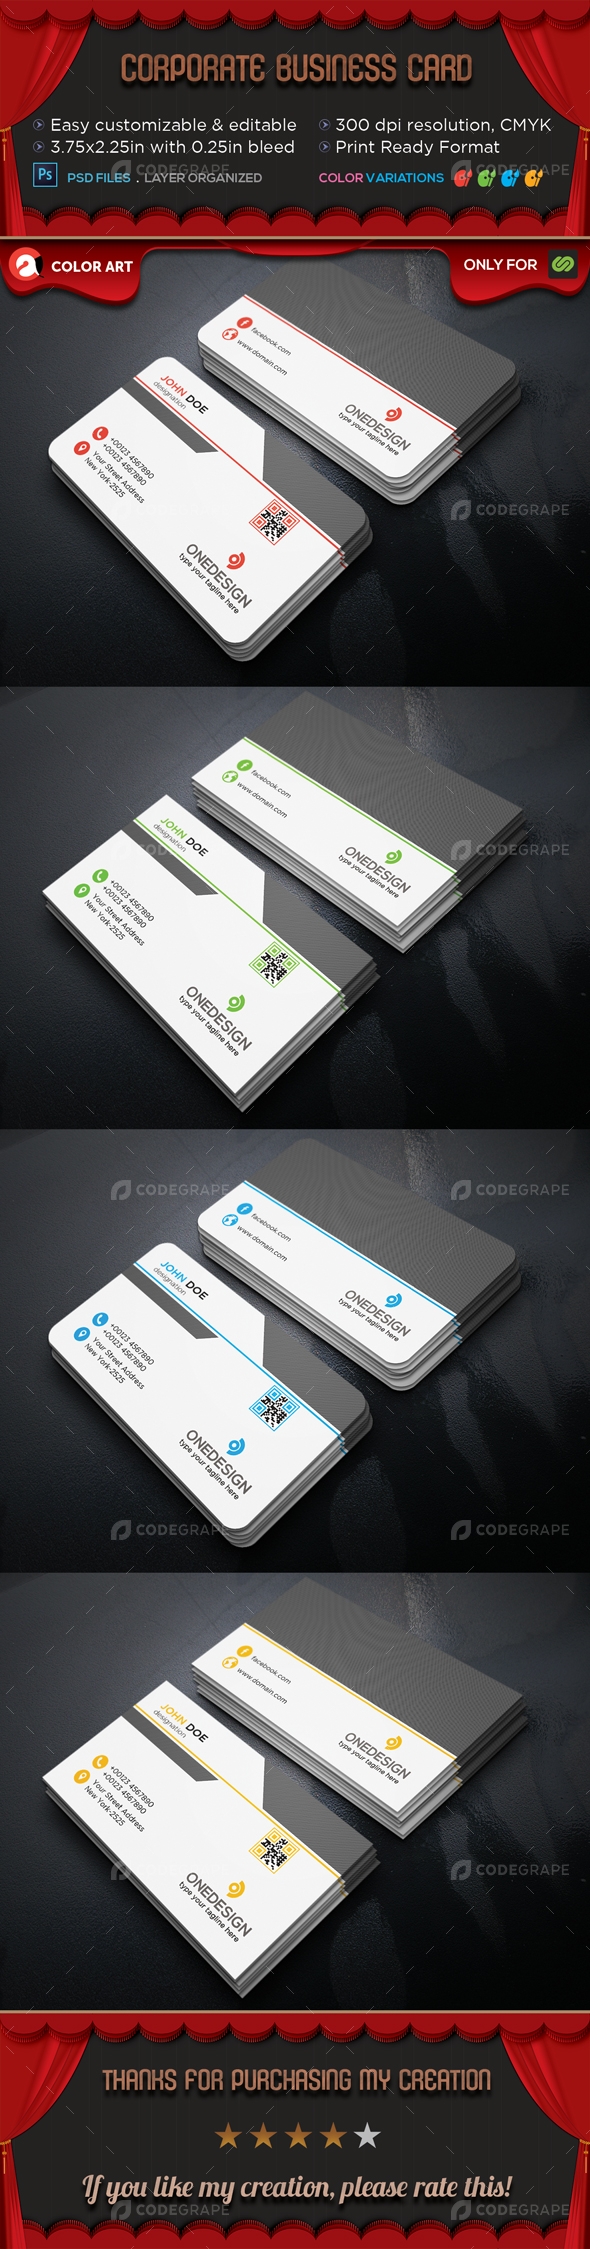 Corporate Business Card V.1